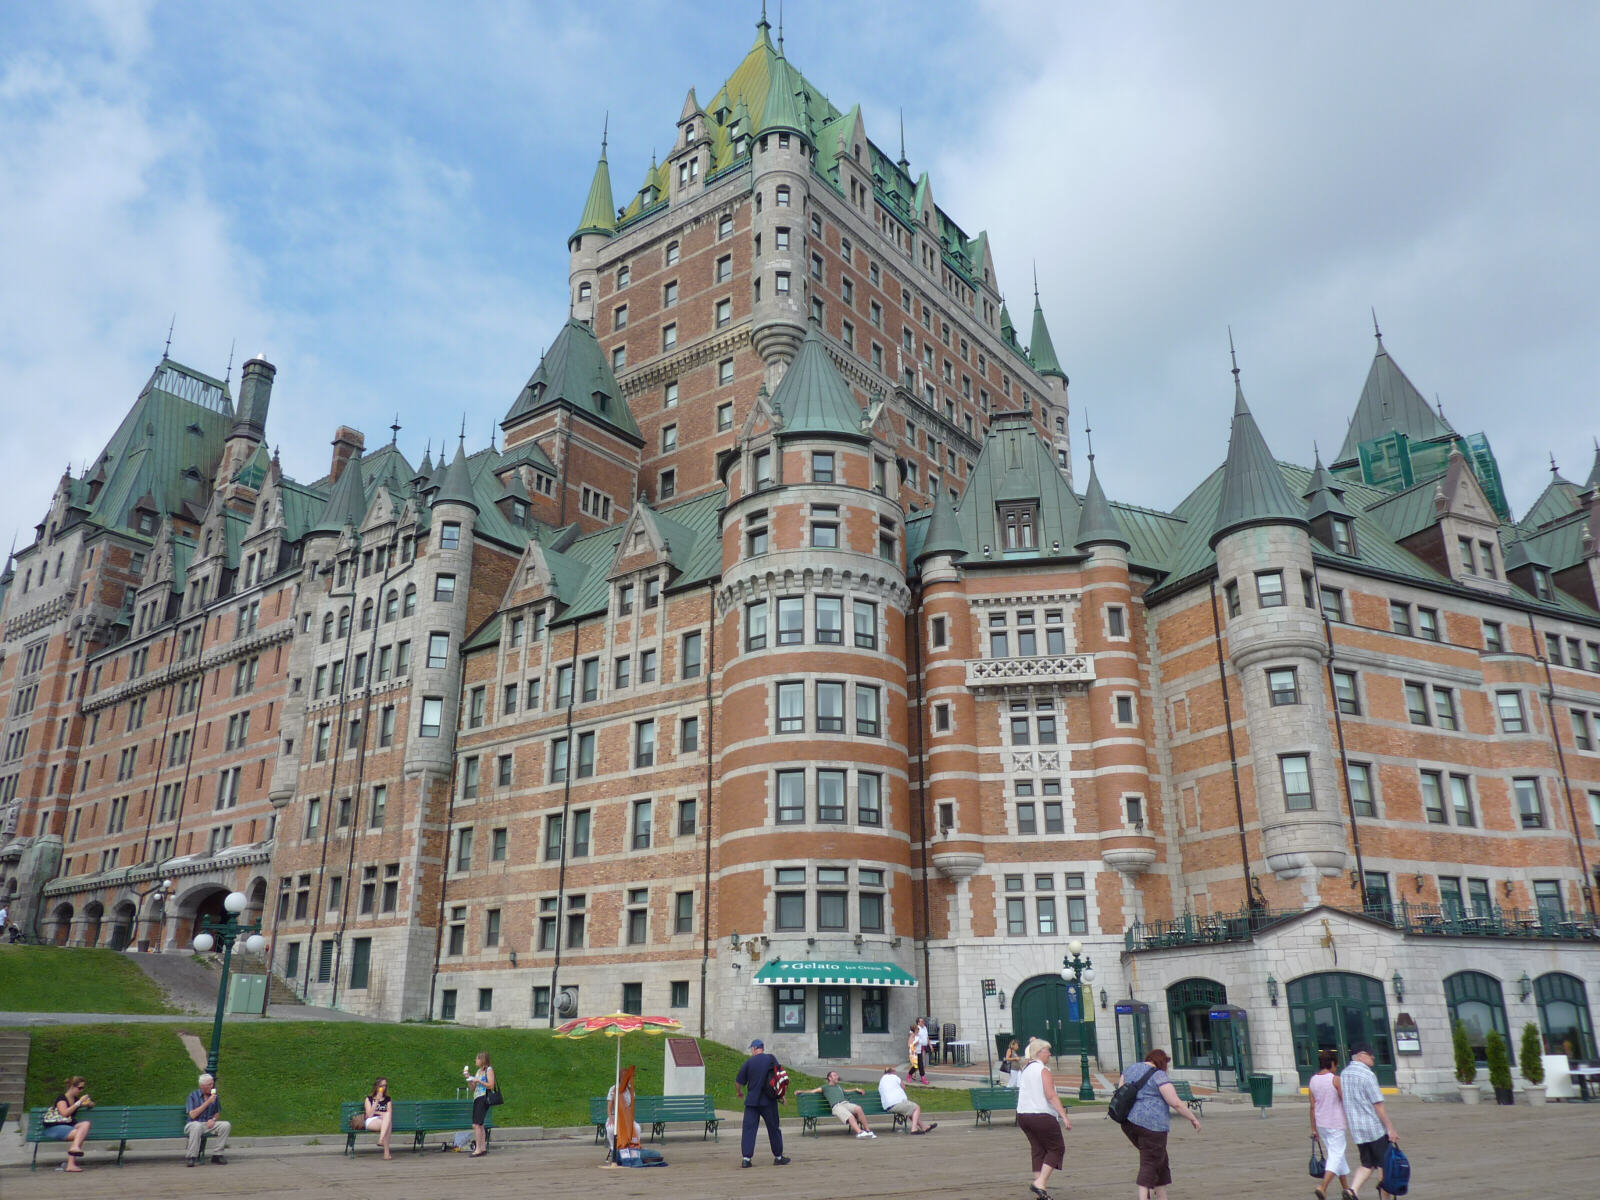 Chateau Frontenac hotel in Quebec city, Canada